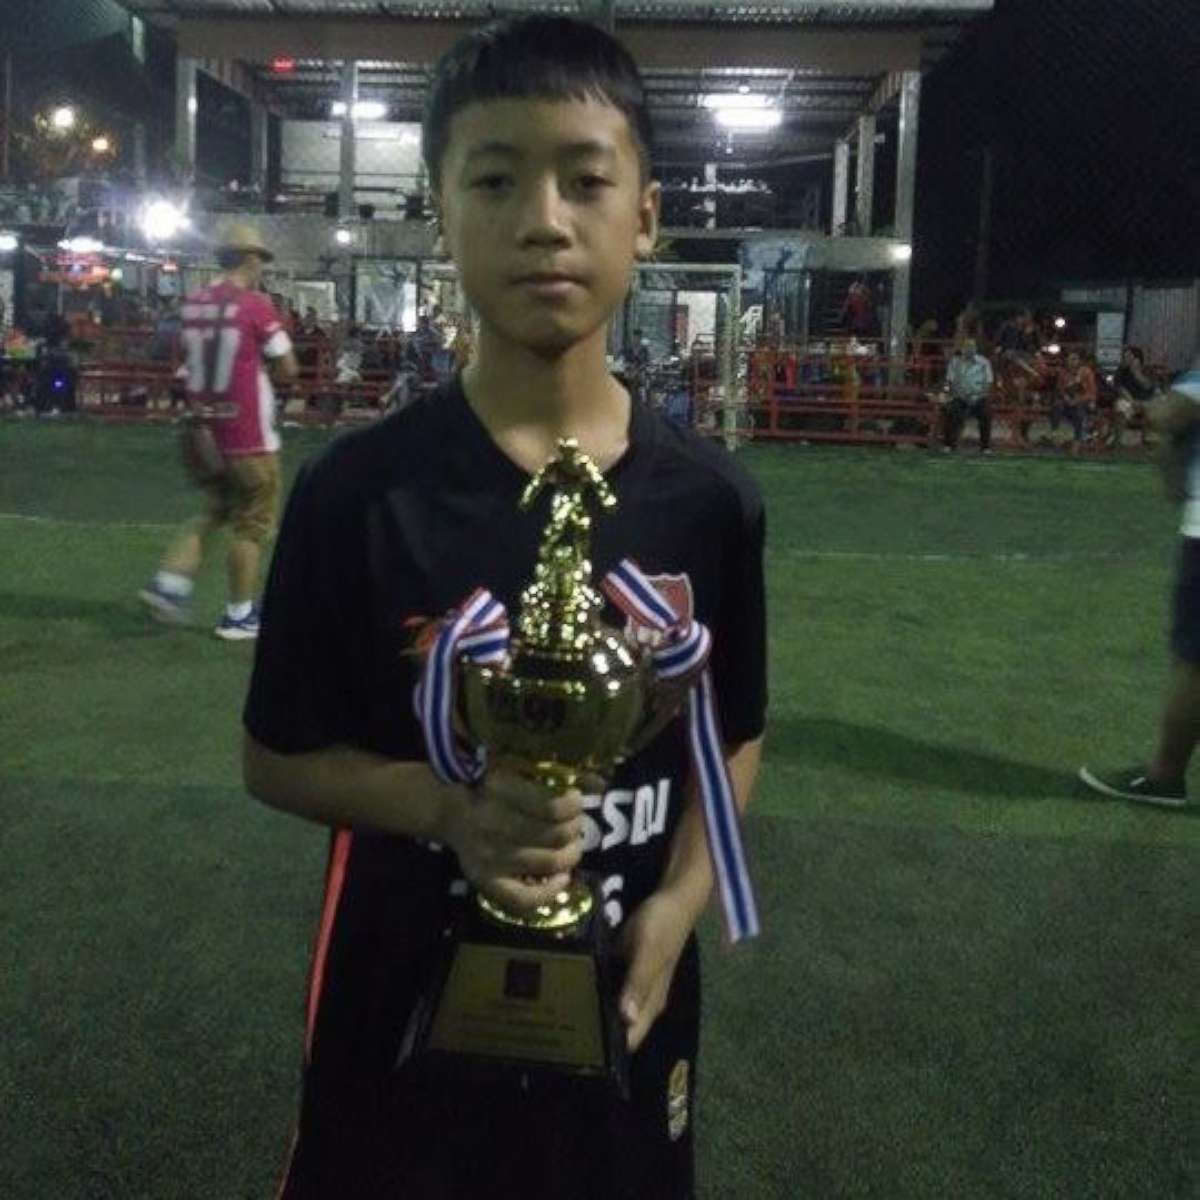 PHOTO: Songpong Jaiwong, 13, of Thai youth soccer team Wild Boars is pictured in this undated Facebook photo.